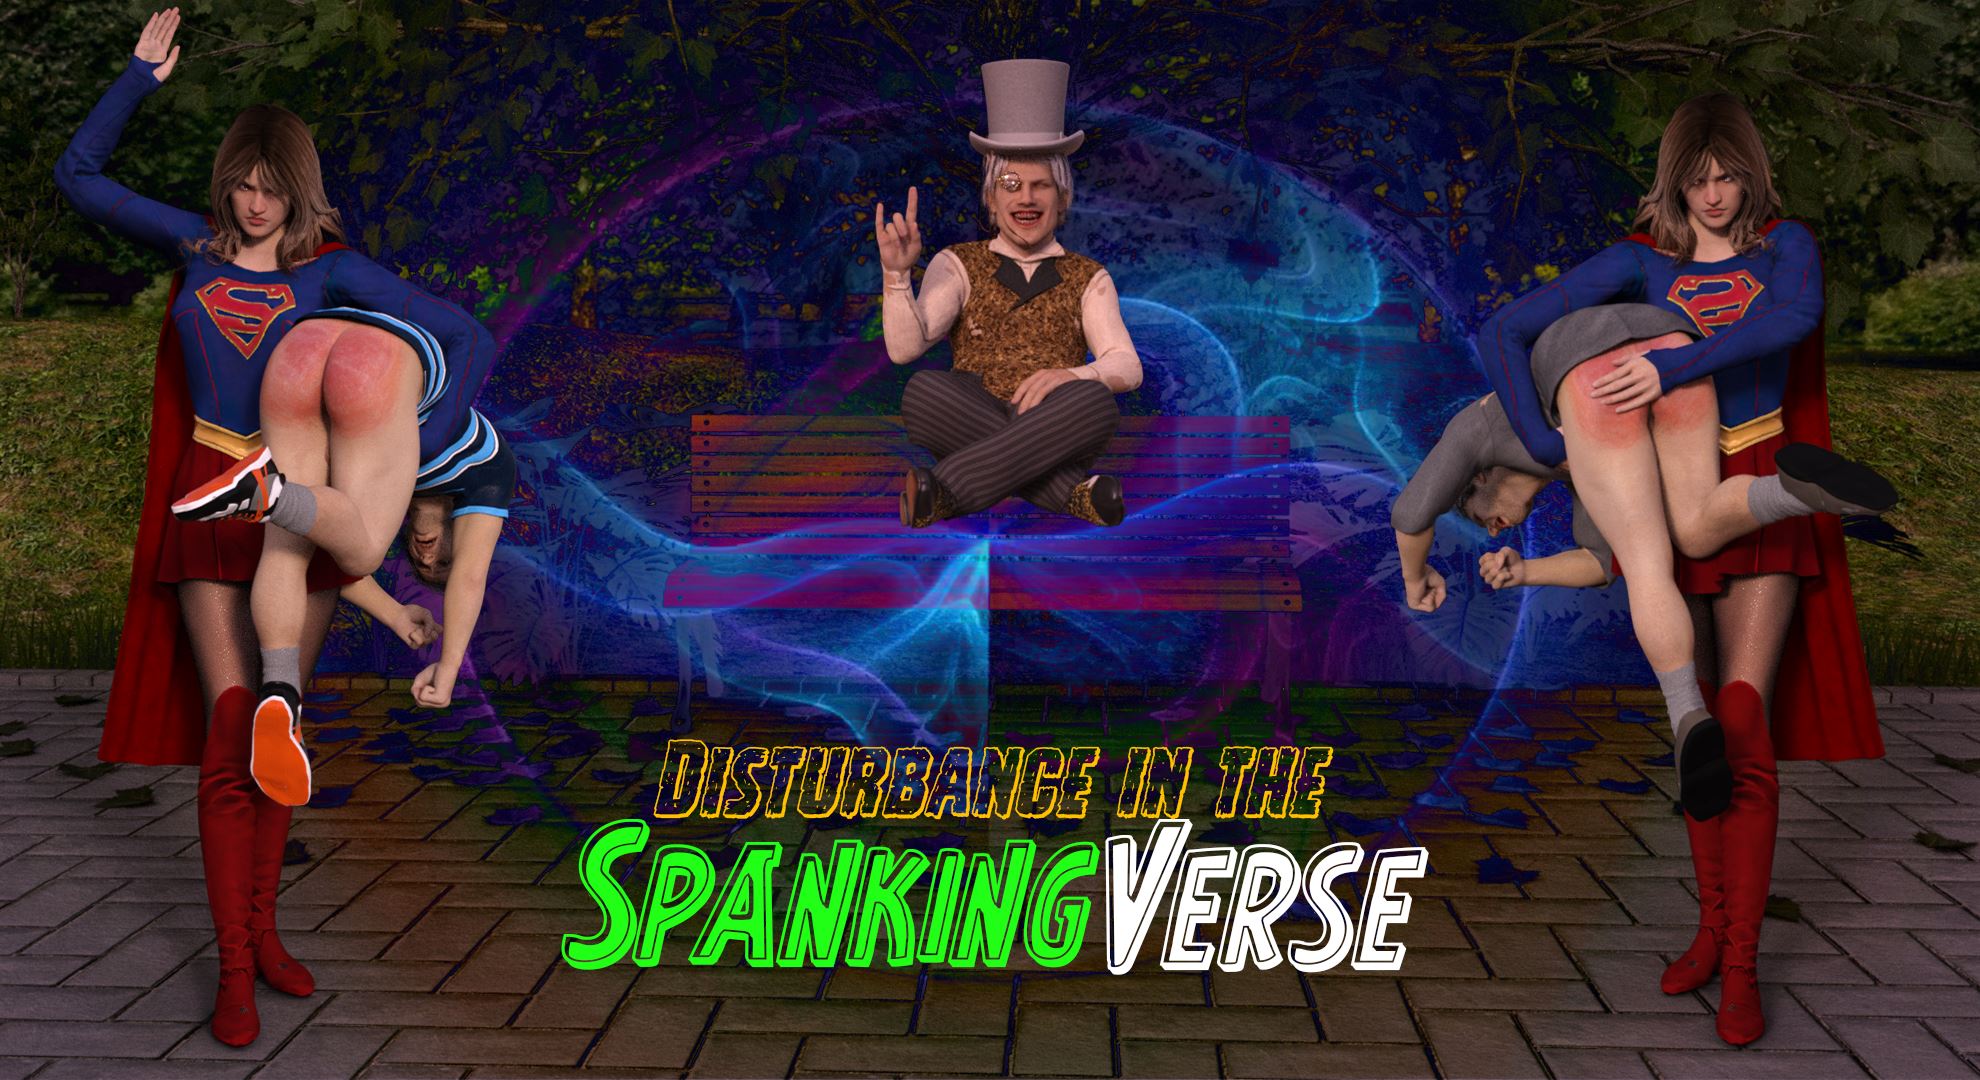 Otk Spanking Of A Lifetime - Disturbance in the Spankingverse Others Porn Sex Game v.Demo Download for  Windows